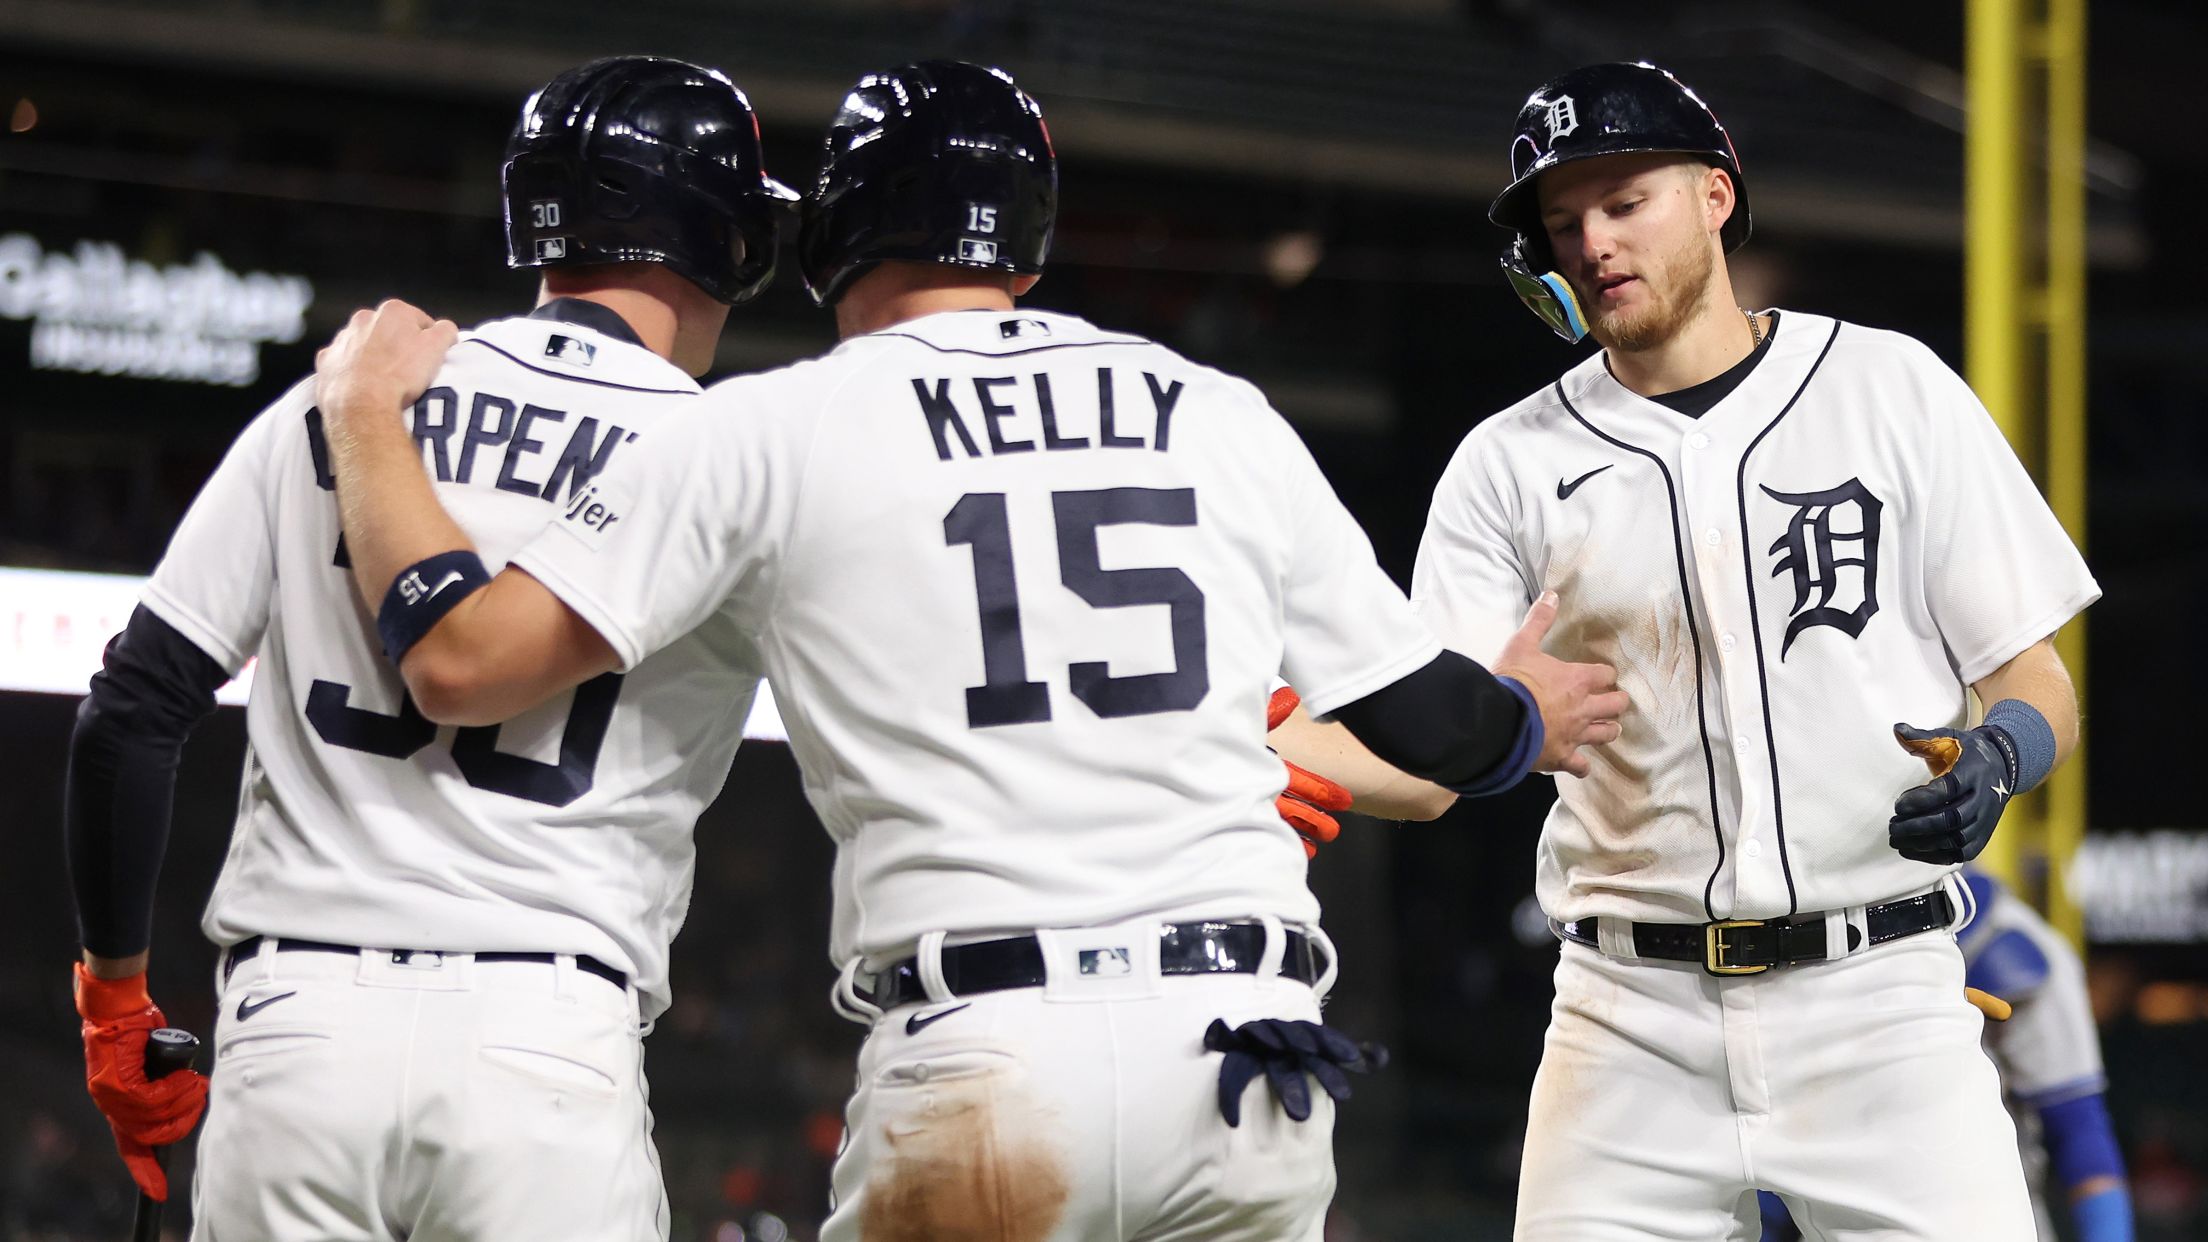 Detroit Tigers: JaCoby Jones' time in the Motor City comes to an end